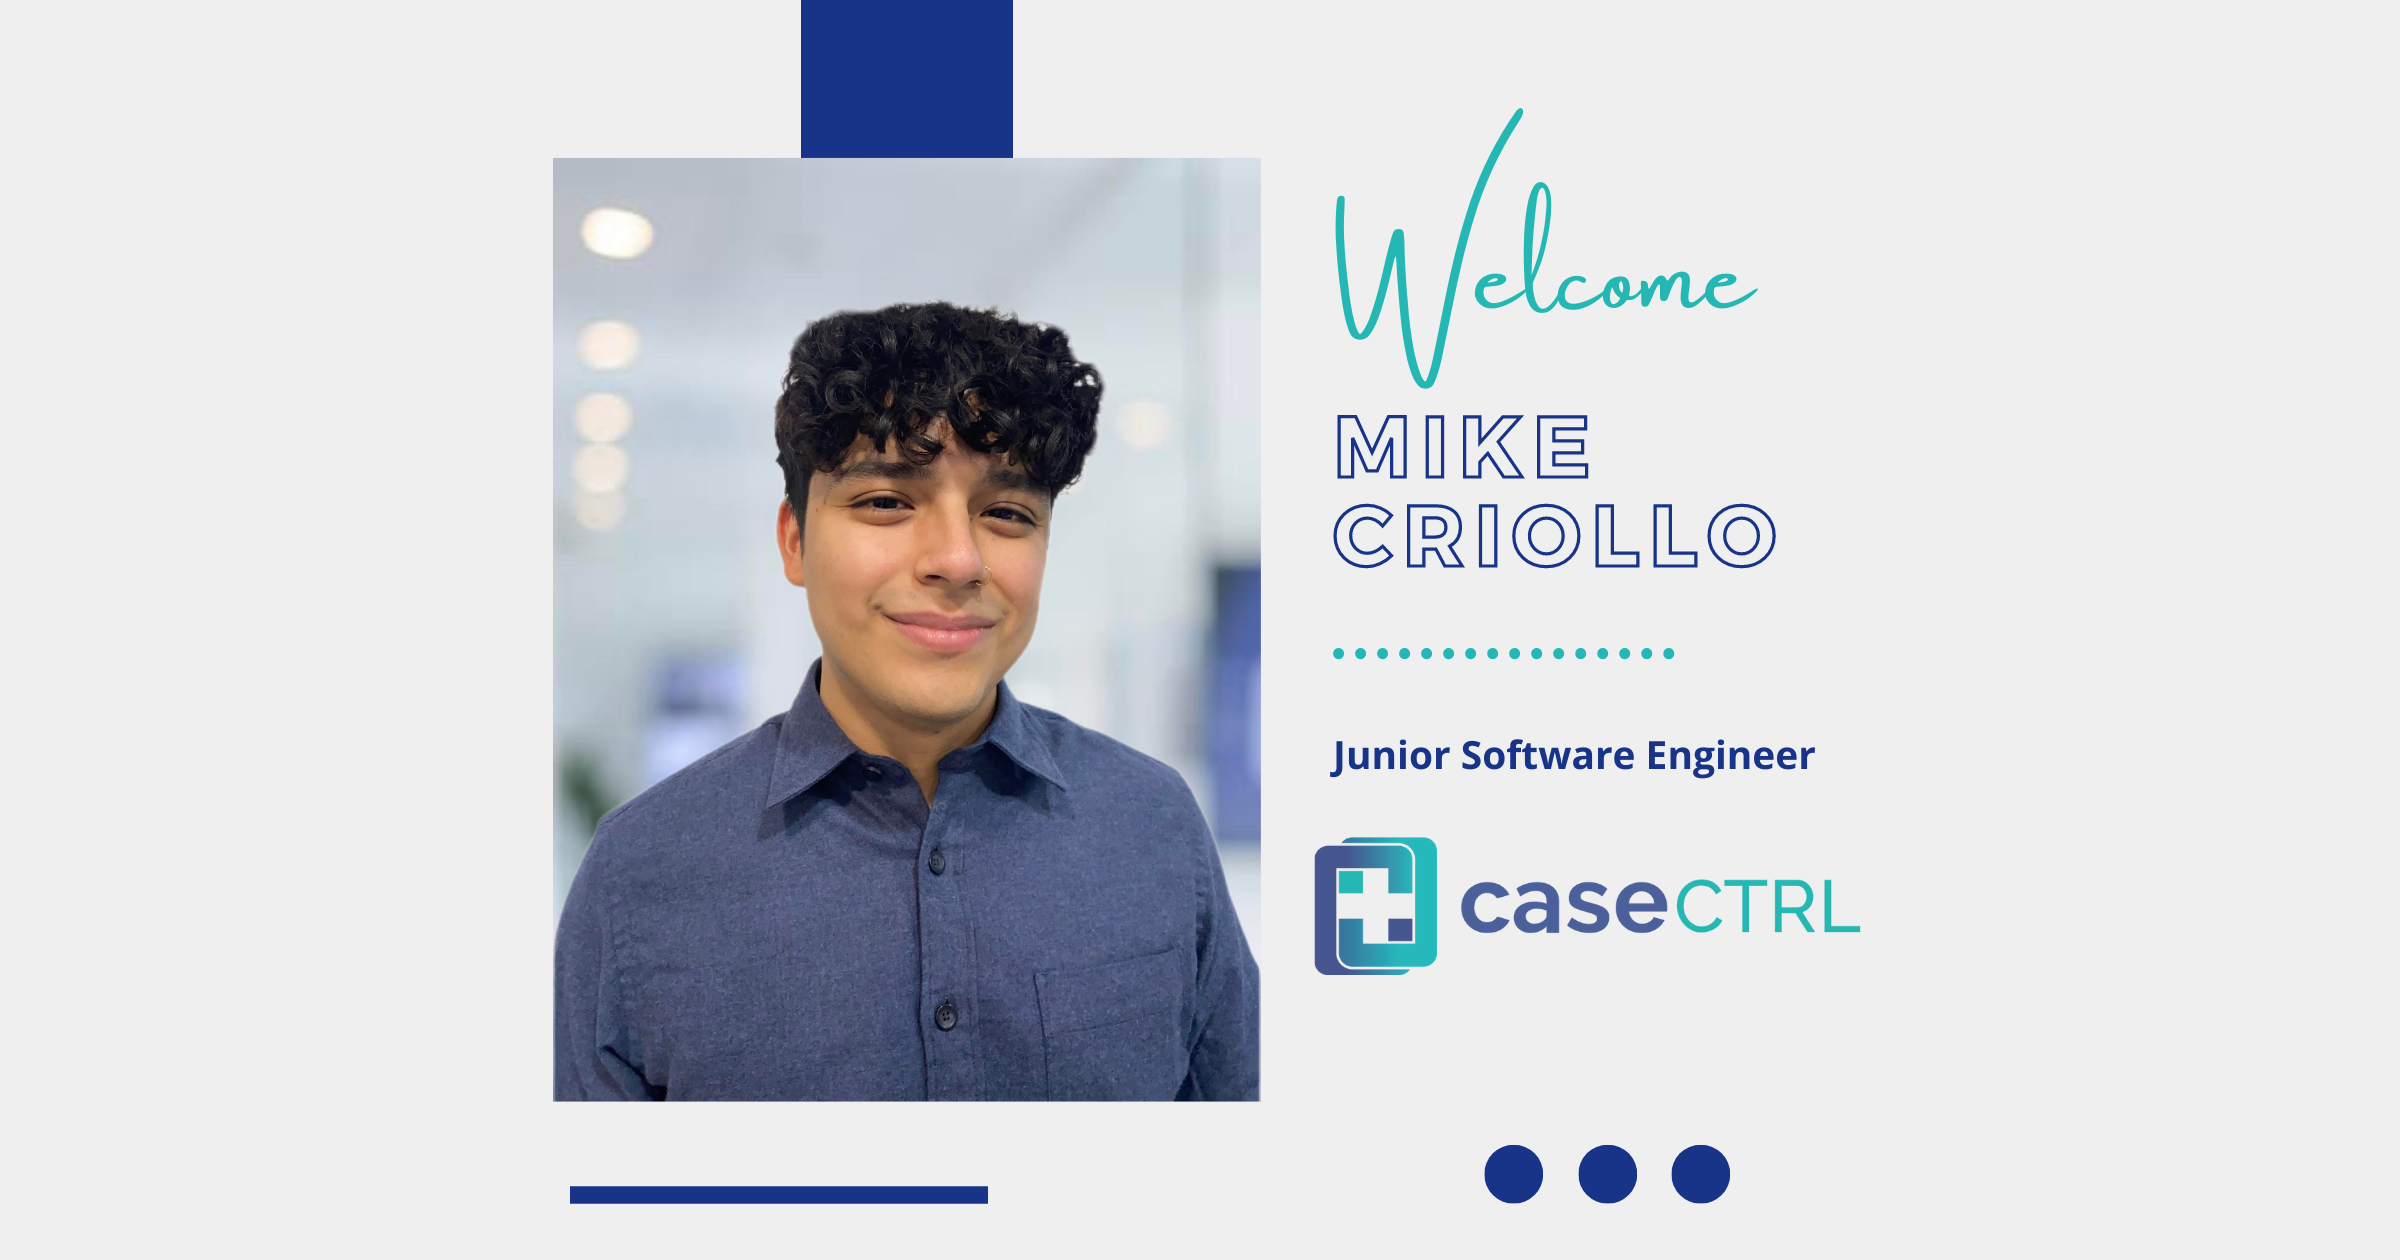 Meet Mike Criollo - Junior Software Engineer at CaseCTRL